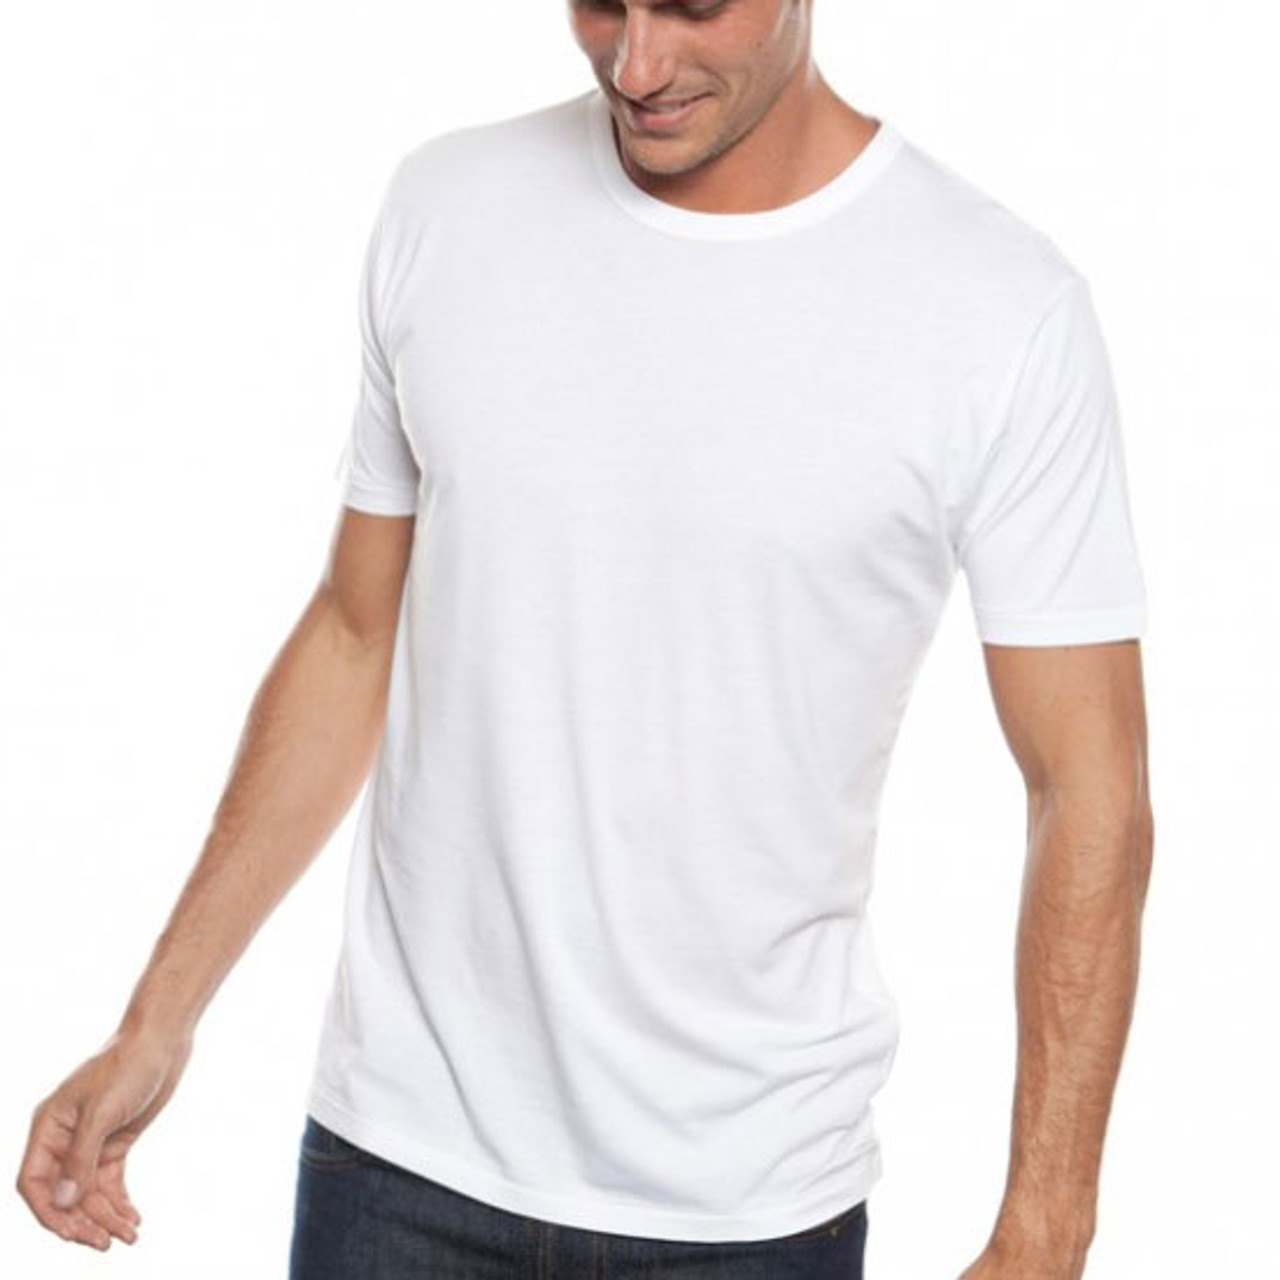 Bodhi Men's Eco Friendly Bamboo Jersey T Shirts Online